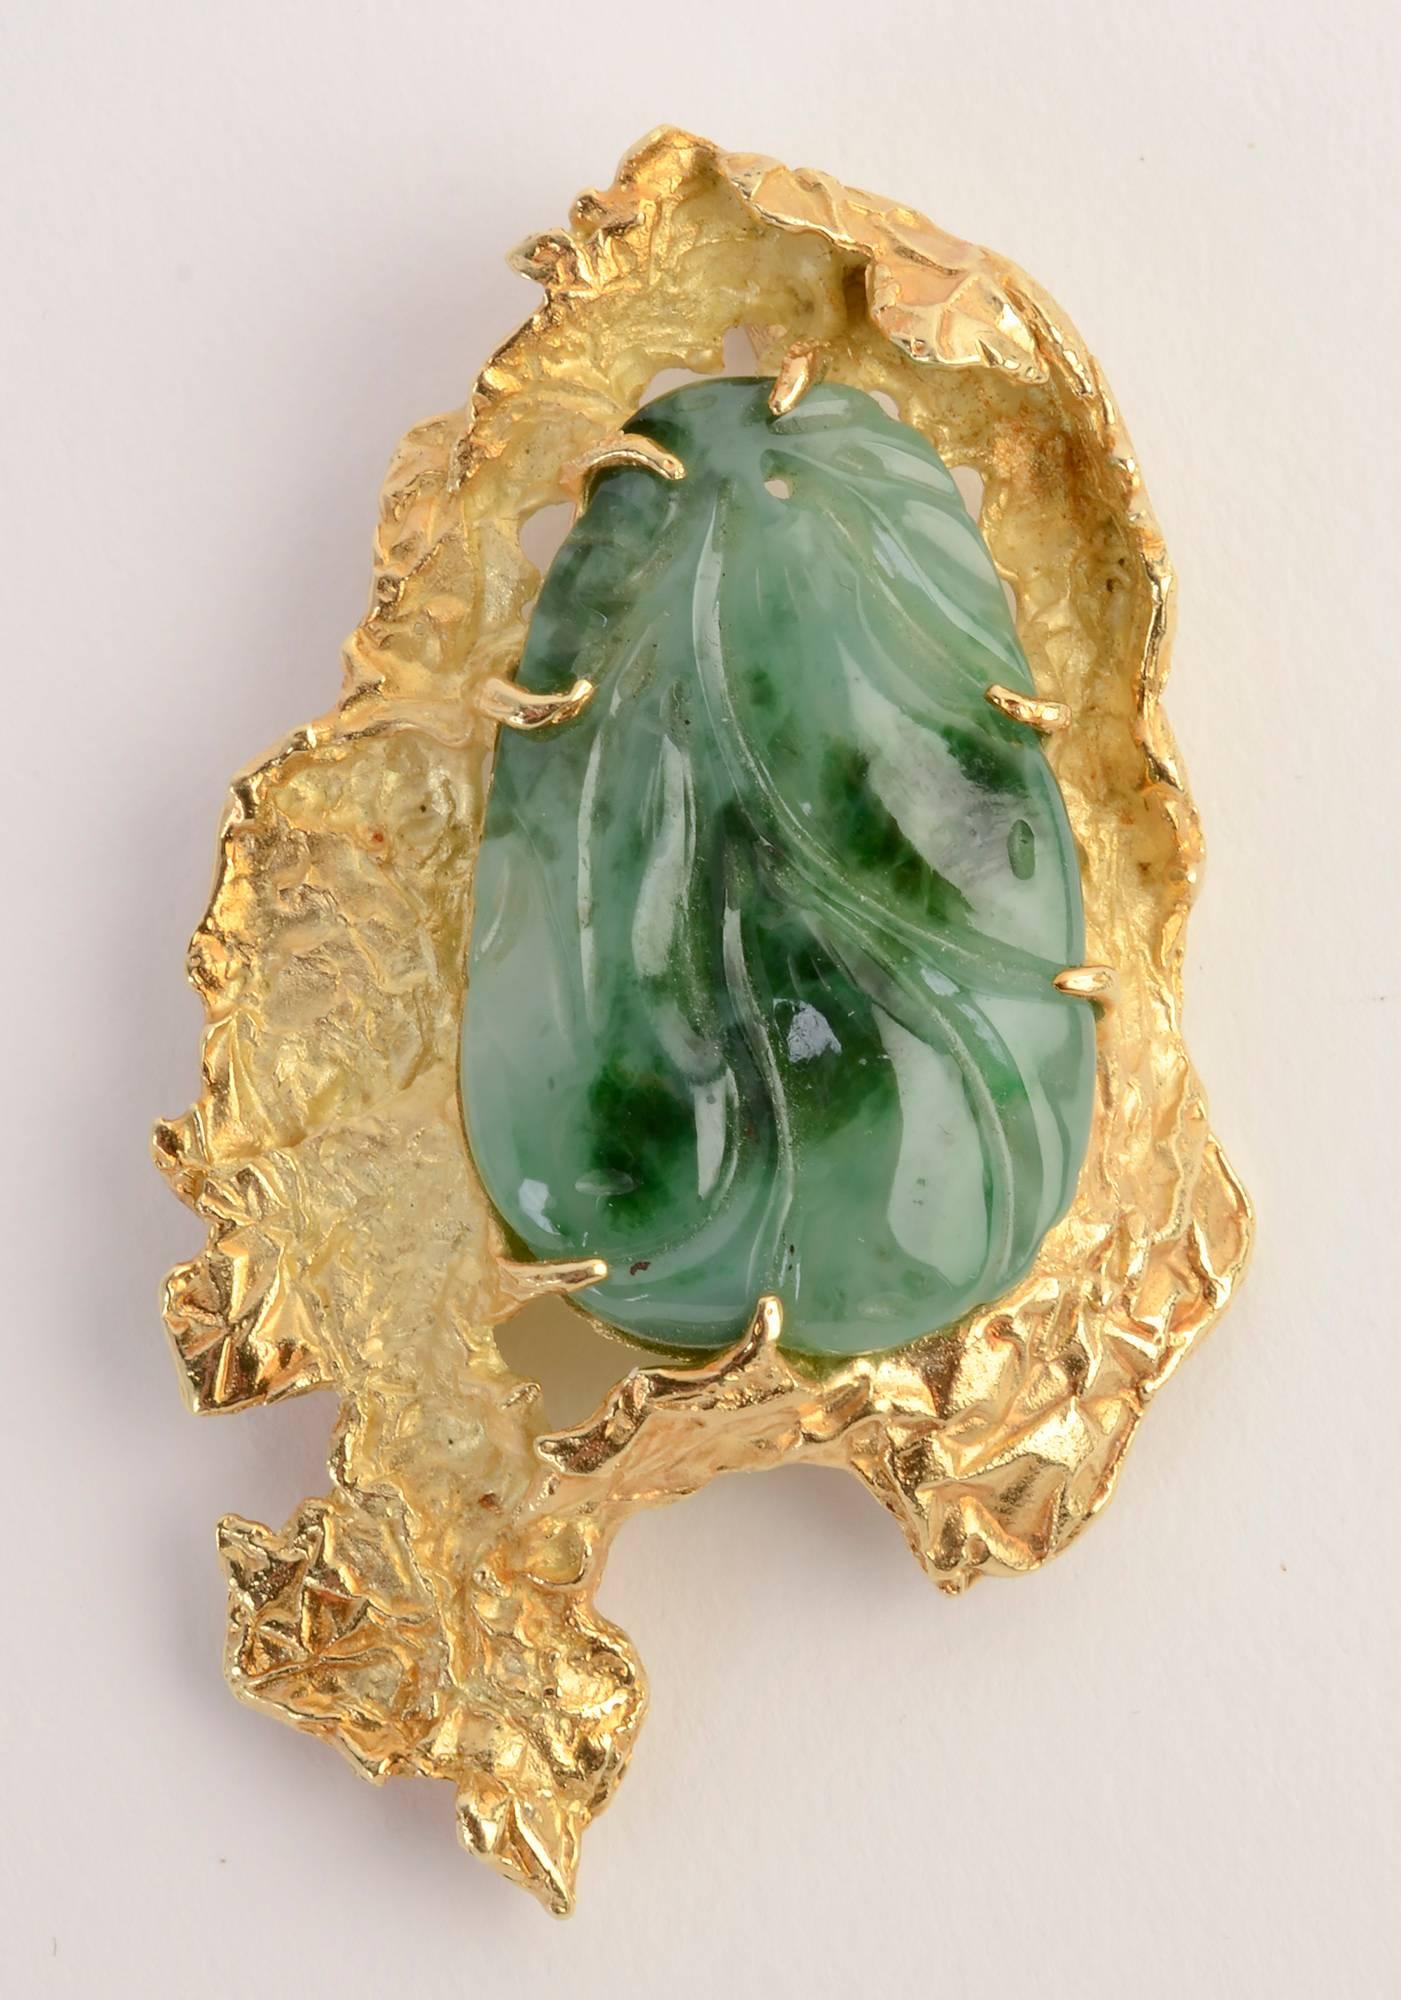 Freeform gold surrounds a carved jade stone in this pendant and brooch by iconic Modernist  jeweler, Ed Wiener. The piece is particularly versatile in that the pinstem allows for it to be worn horizontally while the pendant loop hangs it vertically.